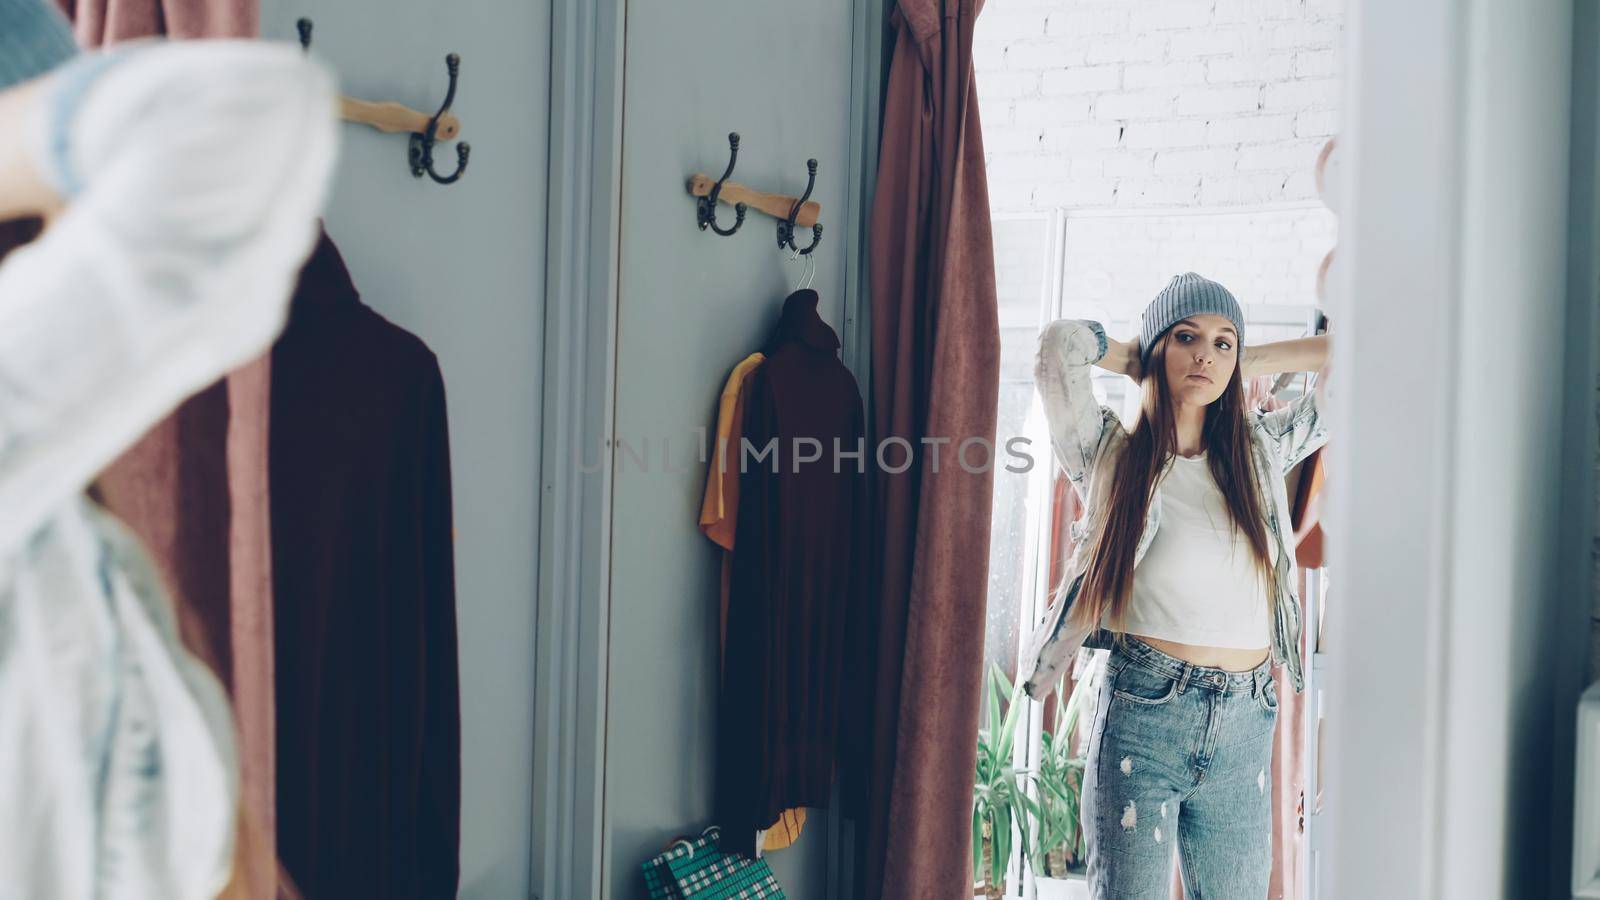 Mirror shot of young girl trying on clothes in fitting room. She is wearing denim jacket, jeans and hat, smoothing her hair, moving and looking in mirror to check image. by silverkblack